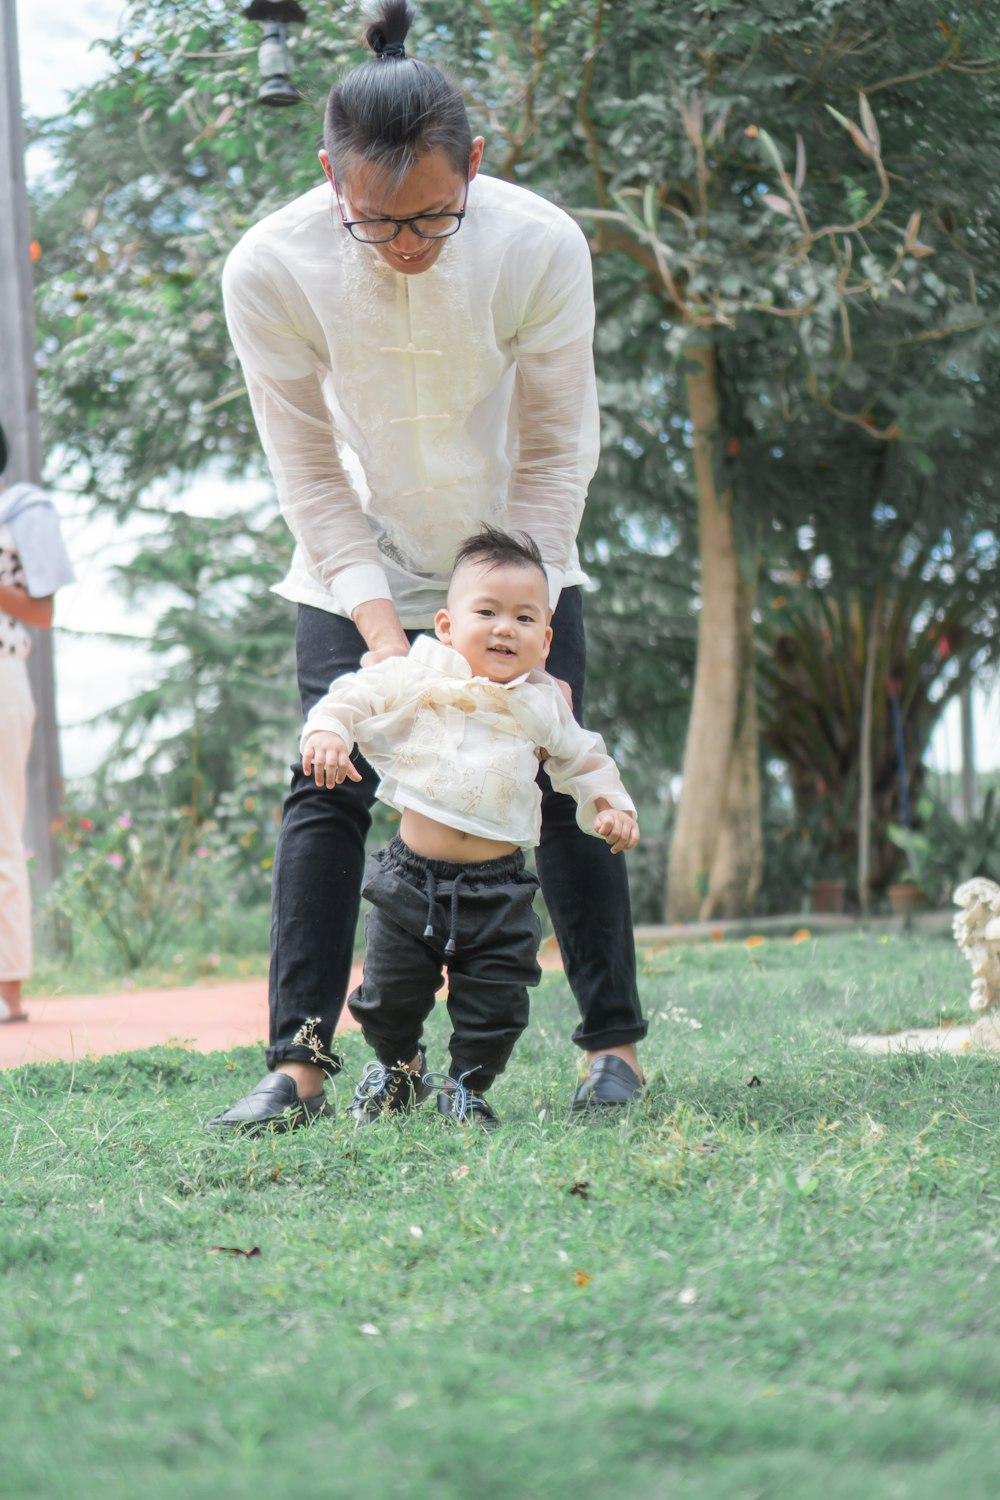 man in beige dress shirt carrying baby in white dress